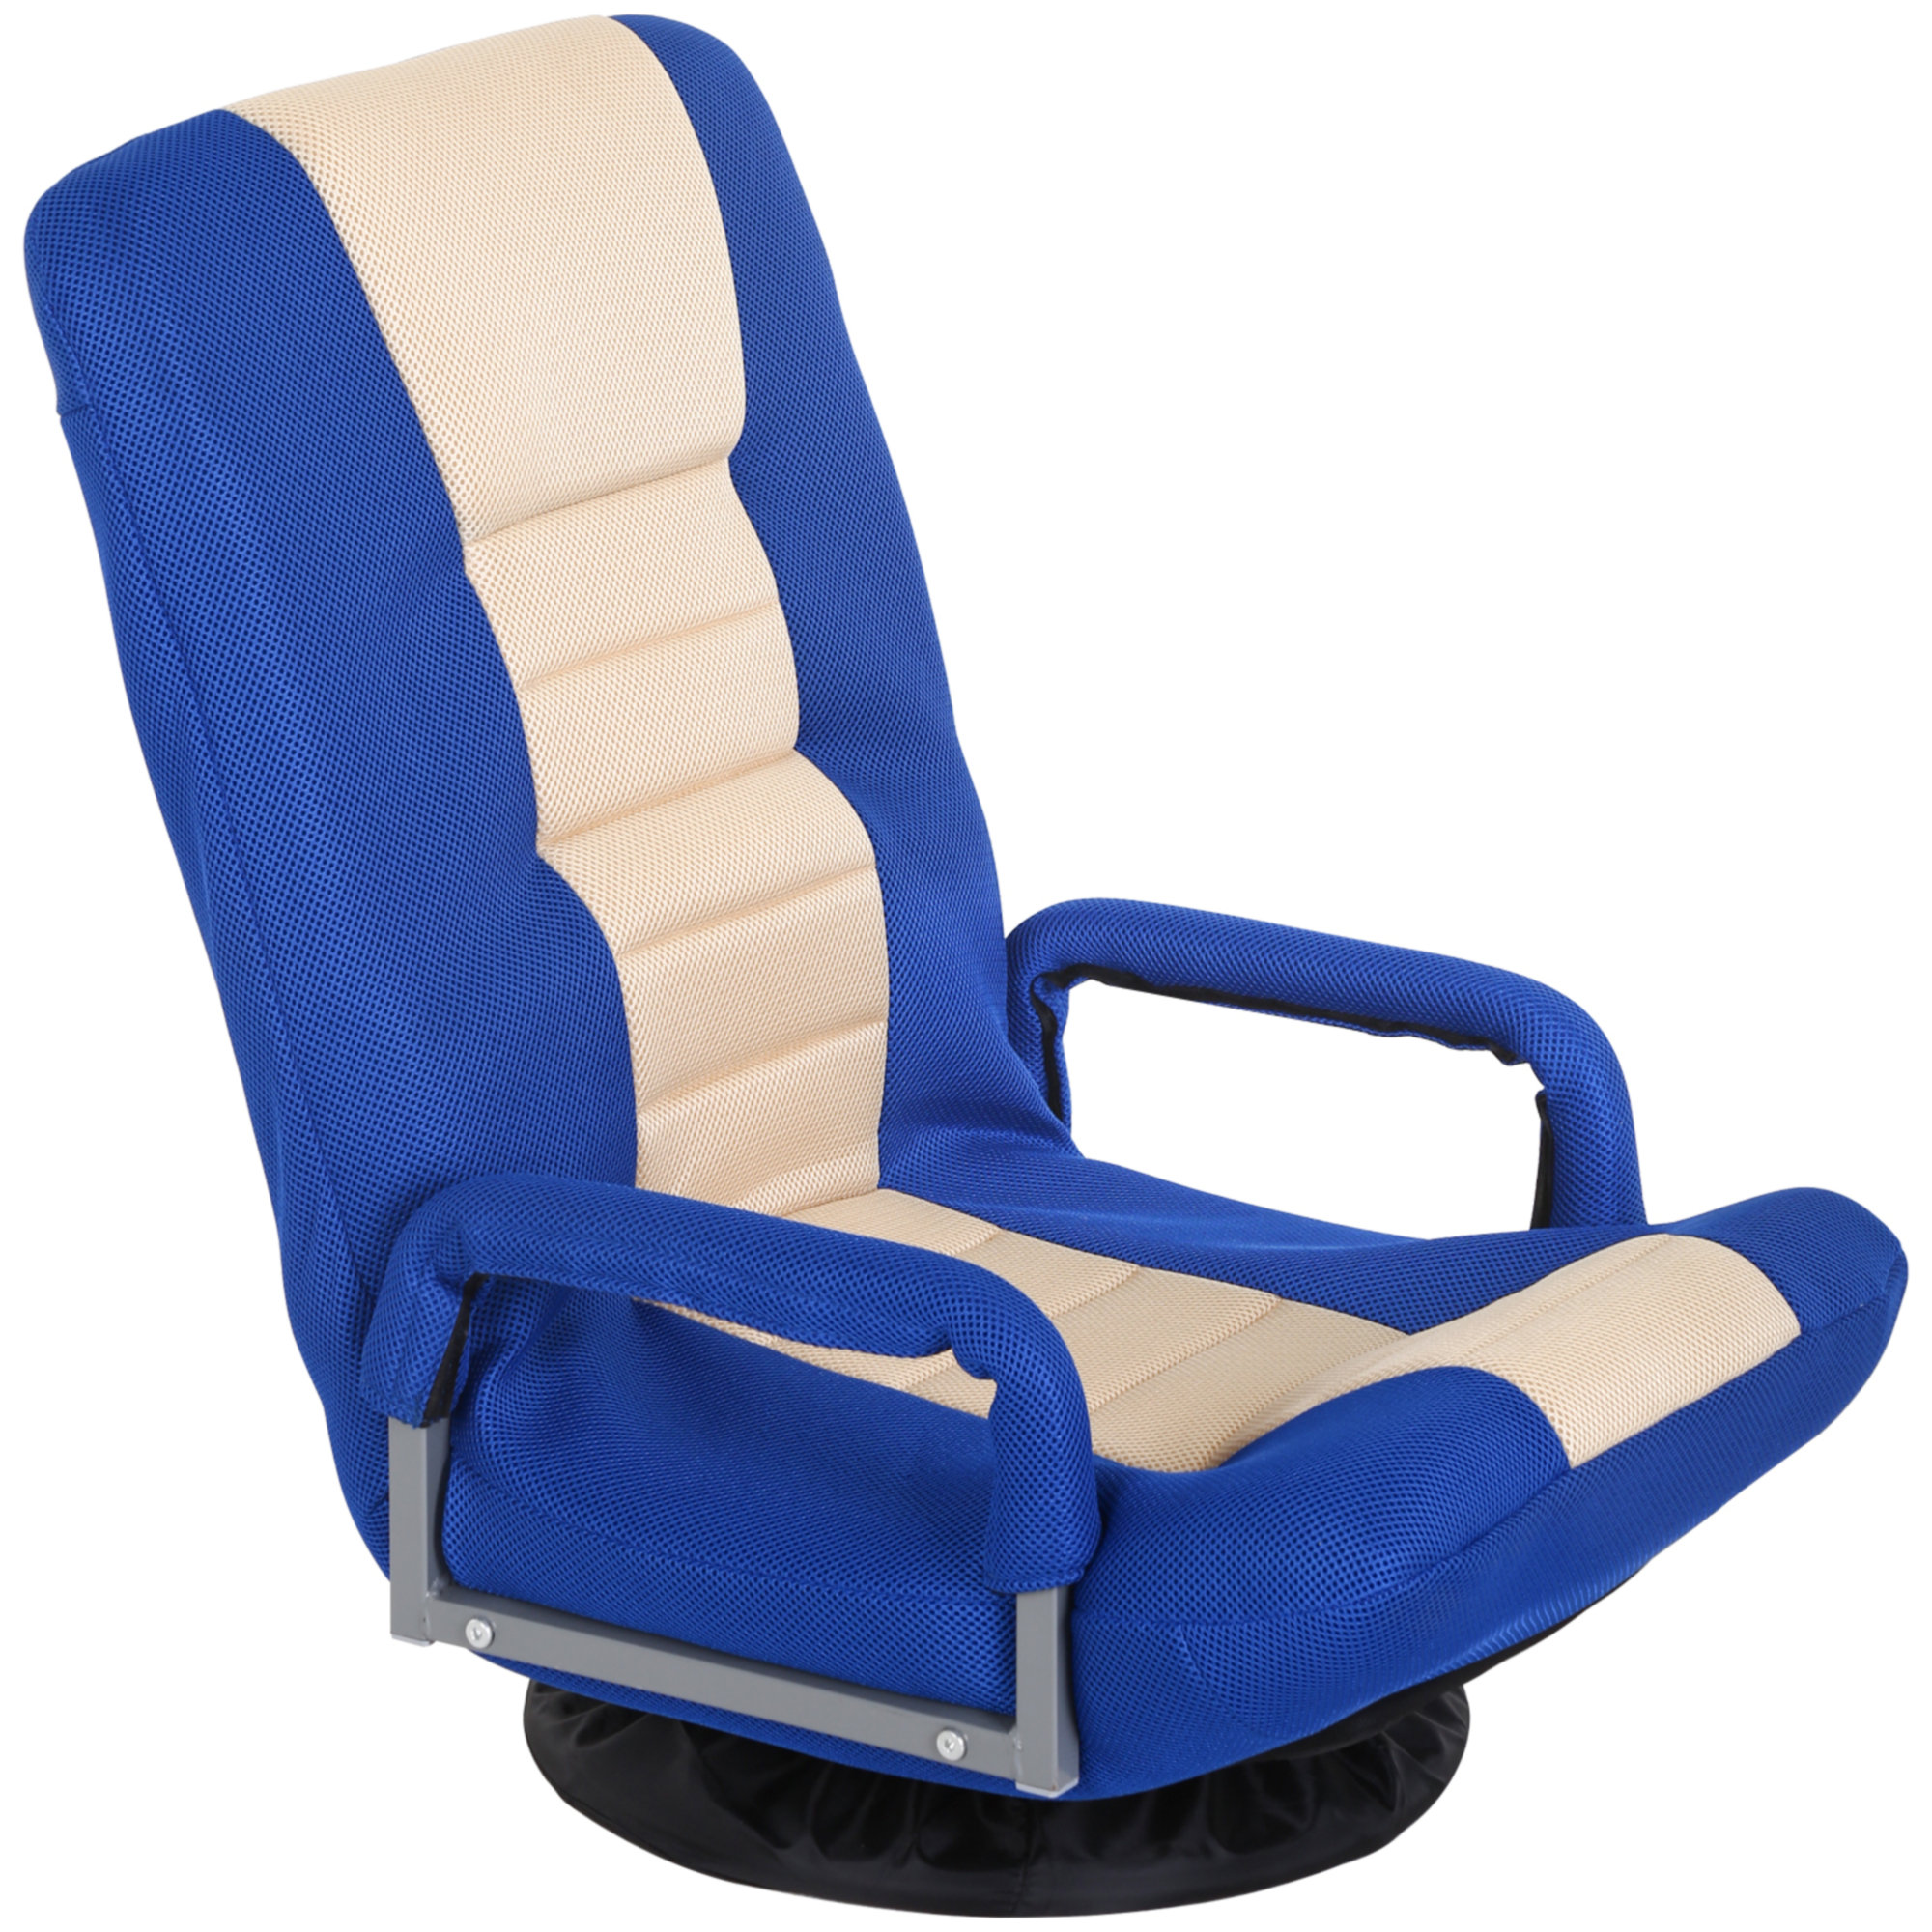 Trule Adjustable 5-positions Padded Floor Gaming Chair With Back